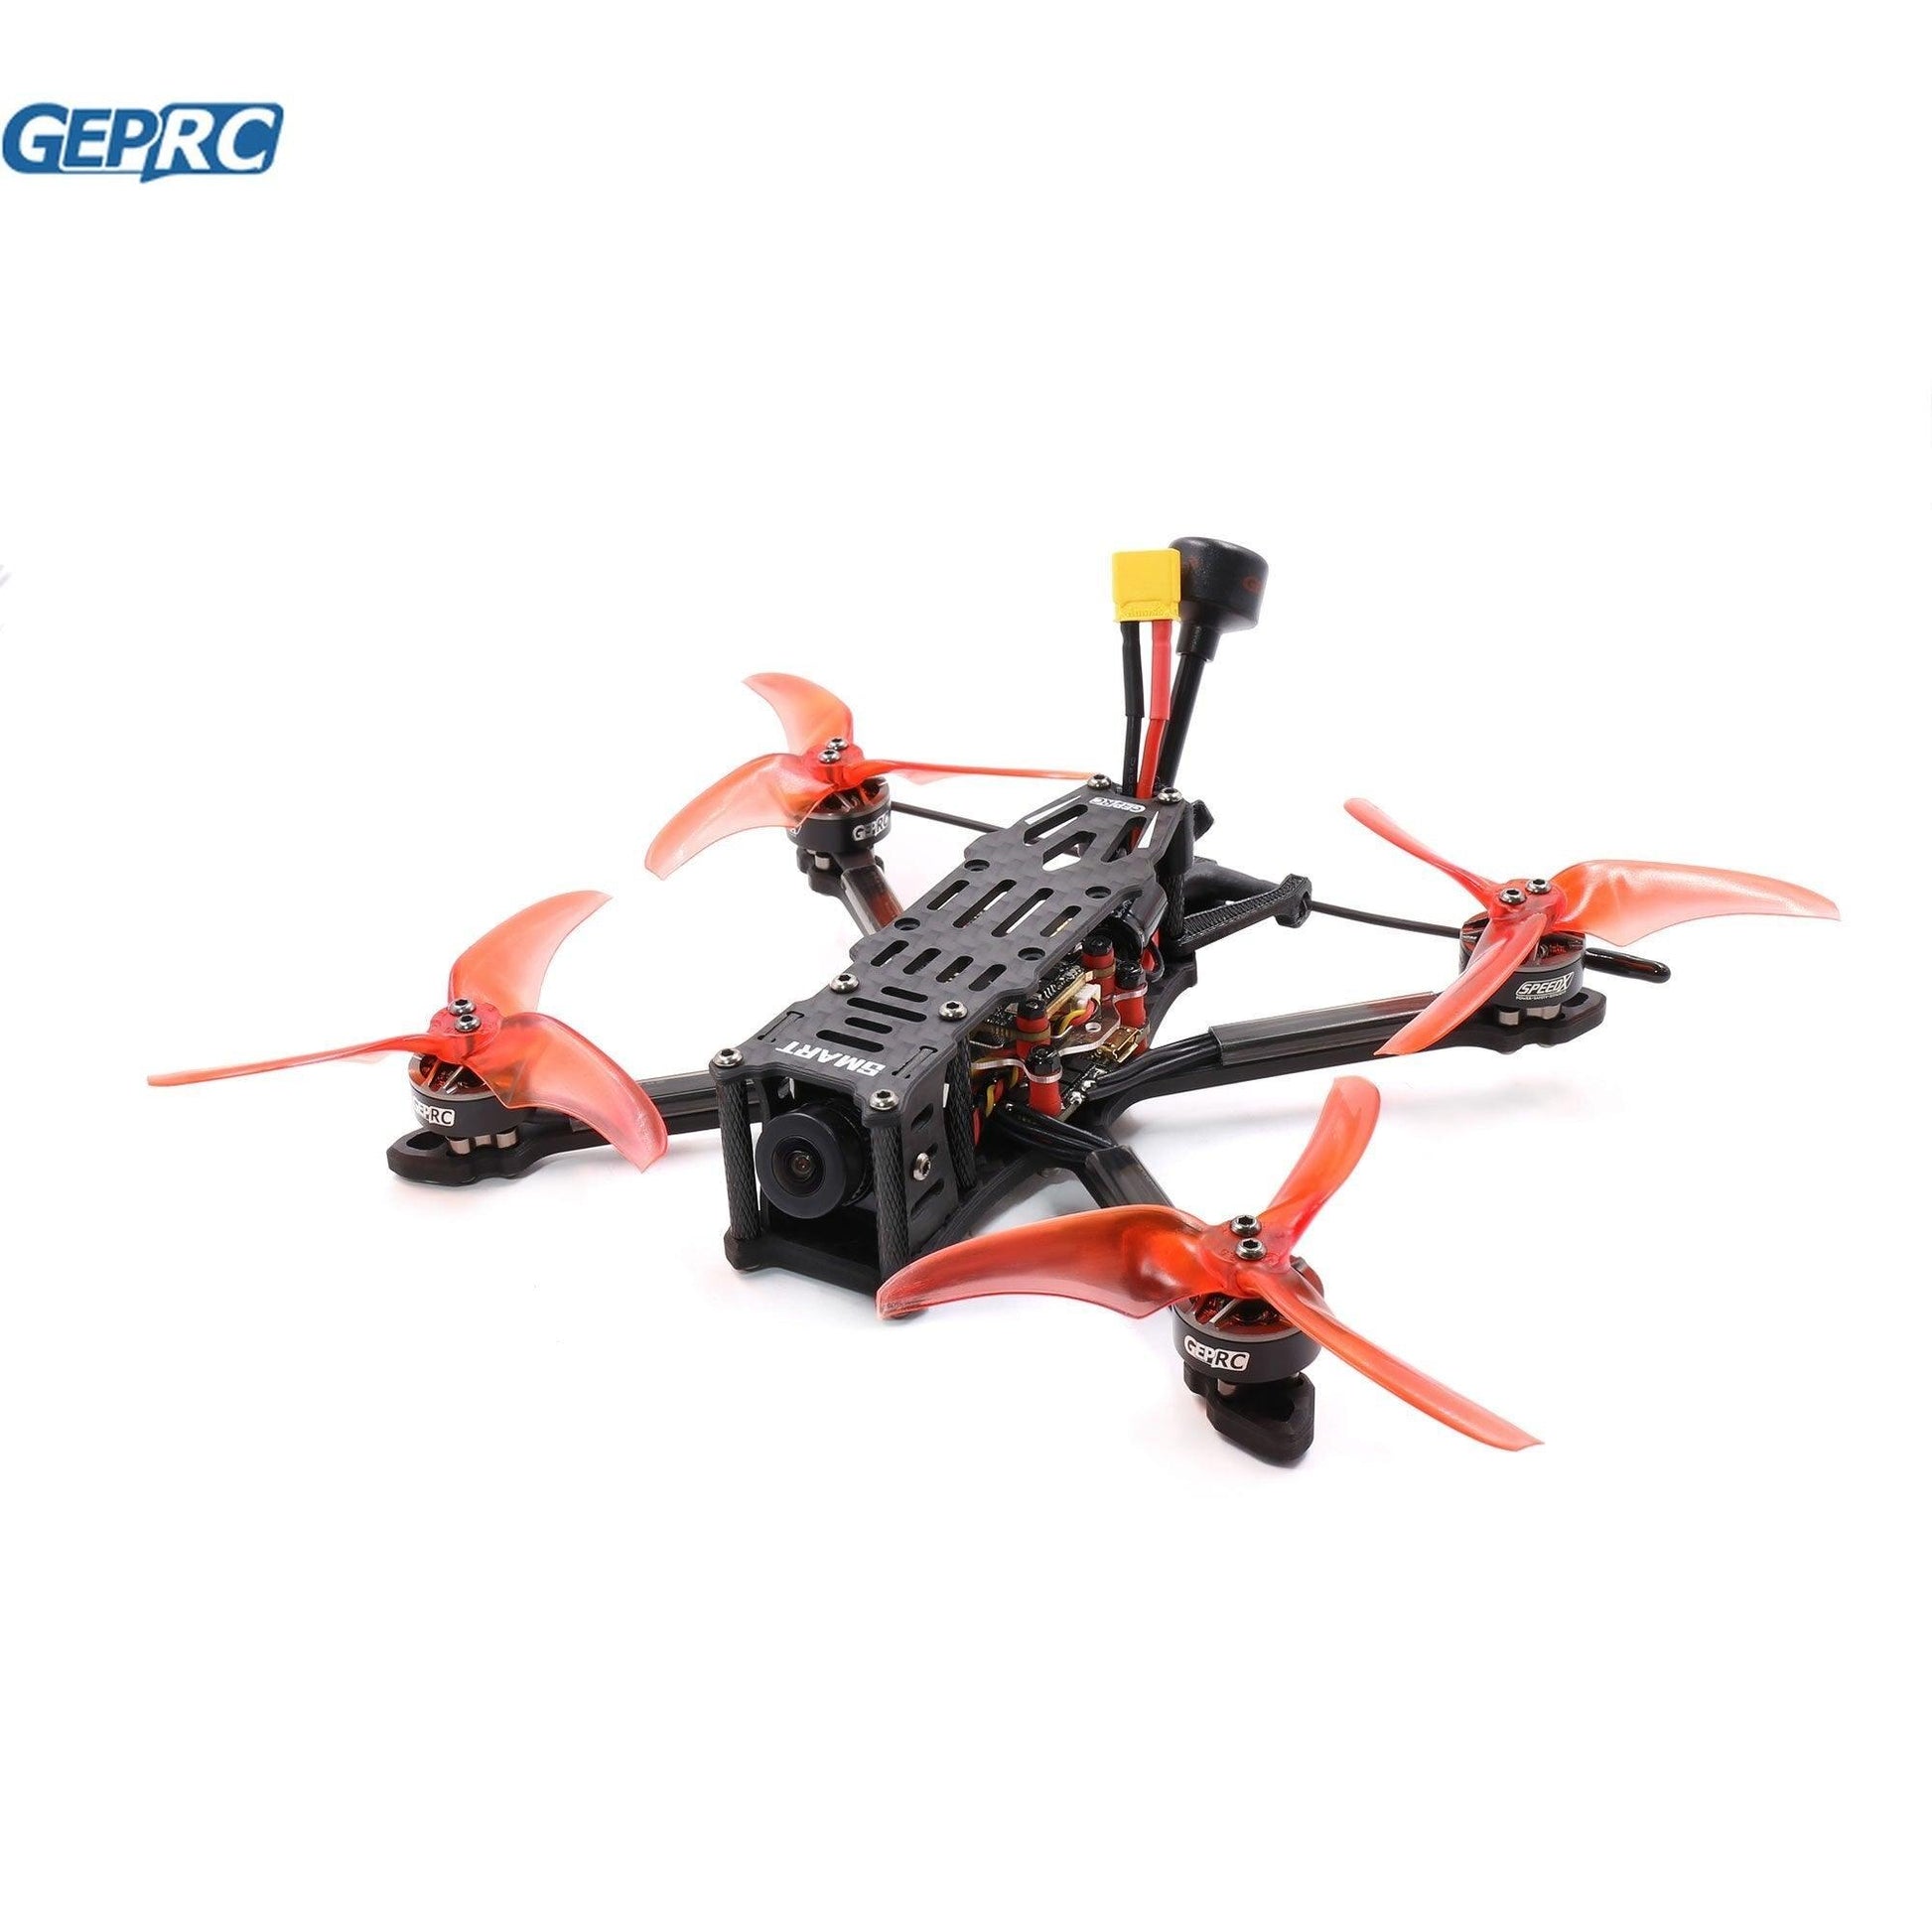 GEPRC SMART 35 FPV Drone - Analog 3.5inch Micro Freestyle Drone Caddx Ratel V2 Camera GR1404 3850KV For RC FPV Lightweight Quadcopter Drone - RCDrone